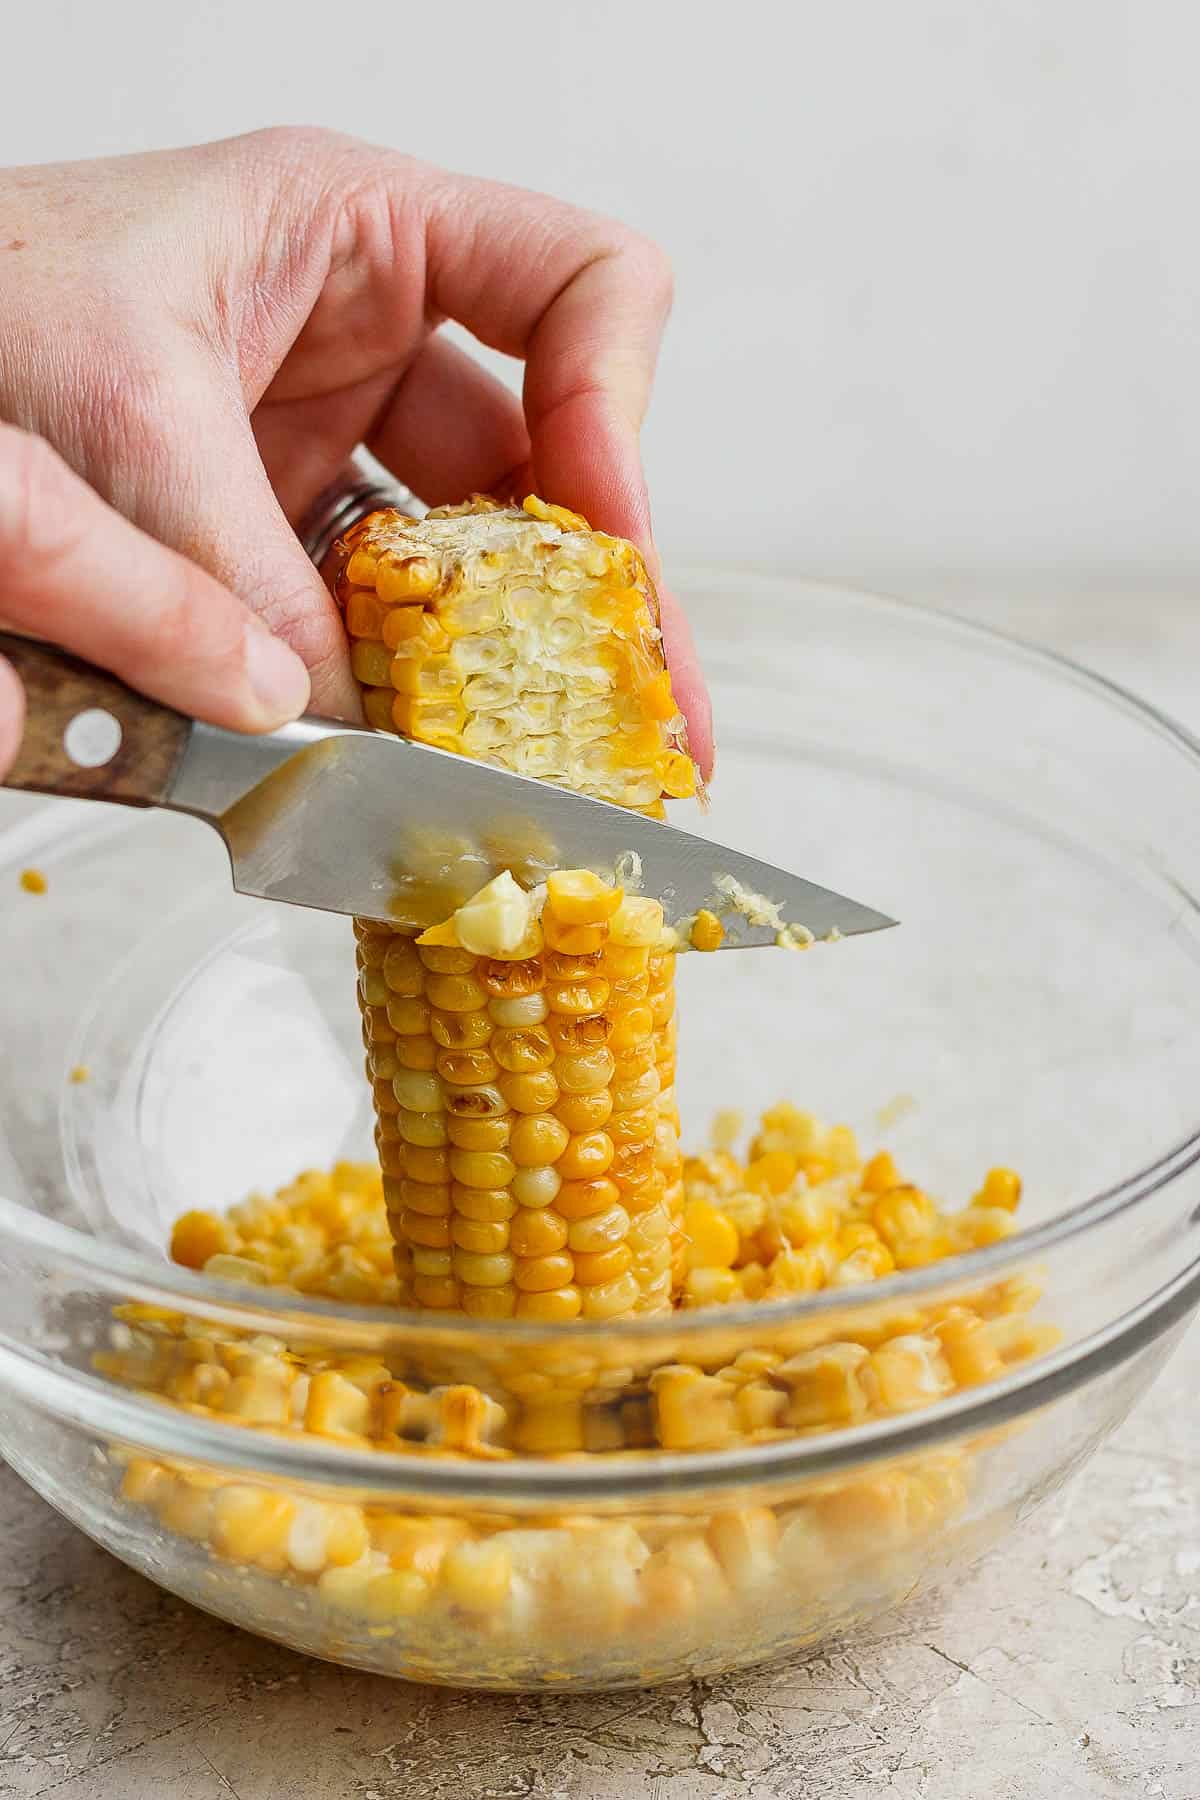 Cooked corn being sliced off the cob.